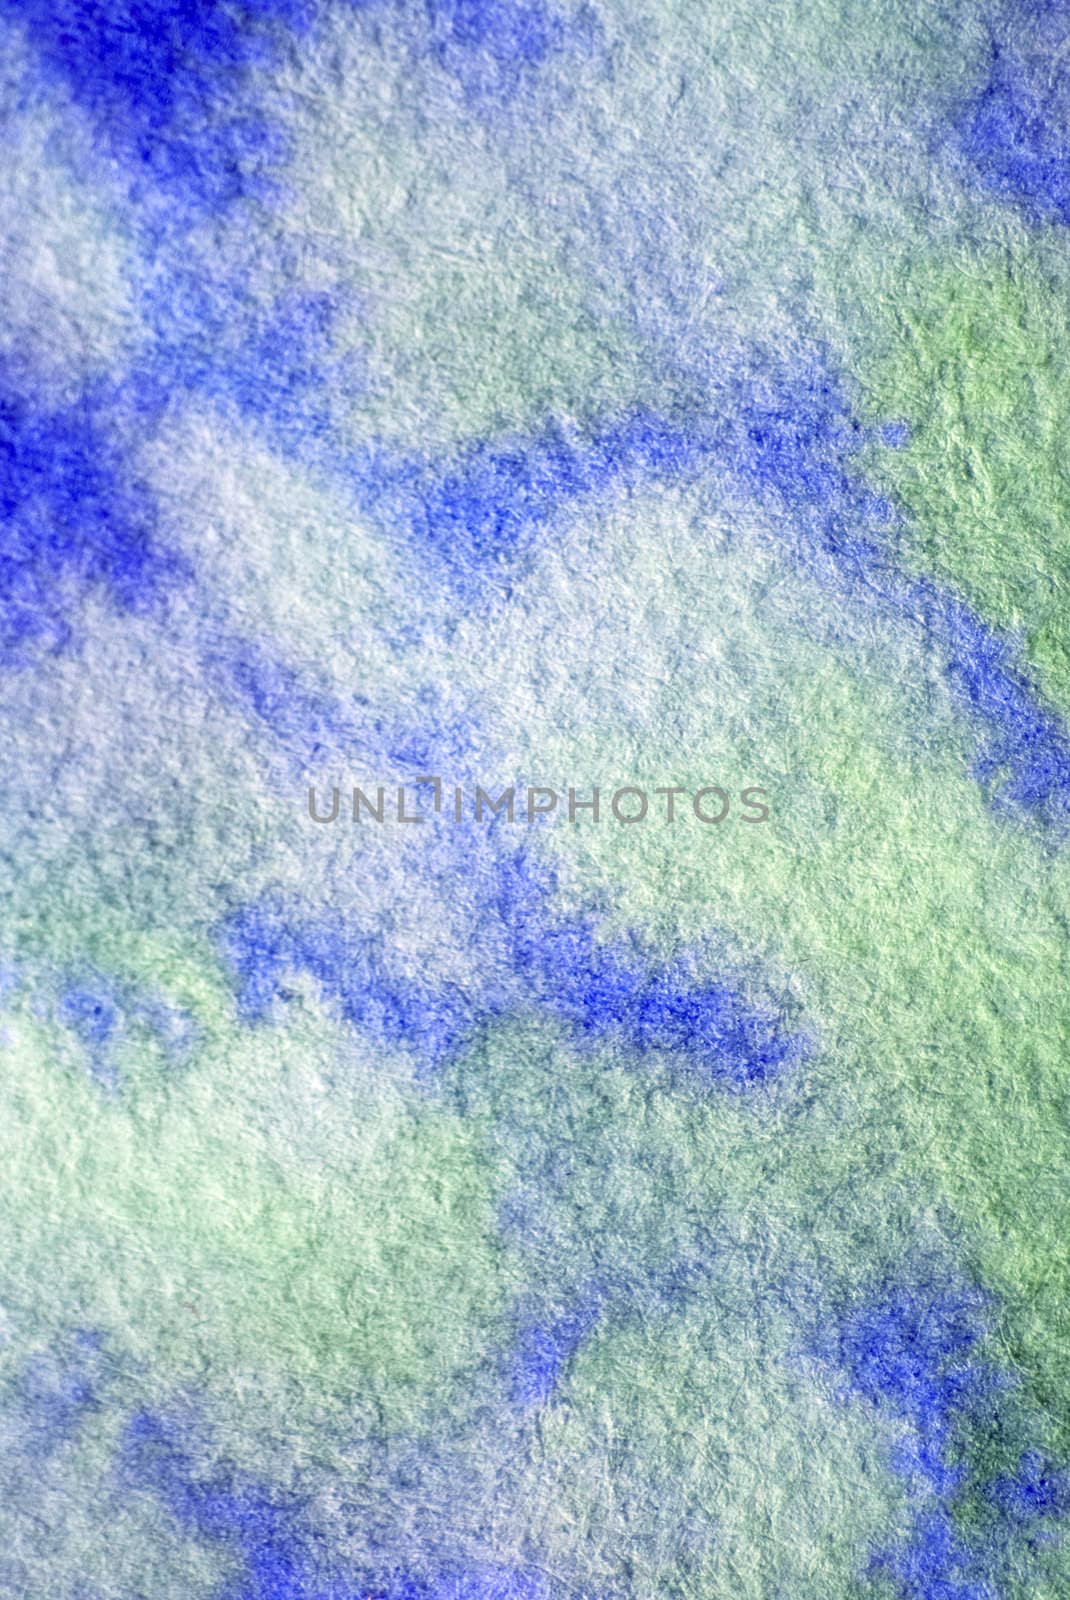 Green and blue paint on watercolor paper with texture for backgrounds.